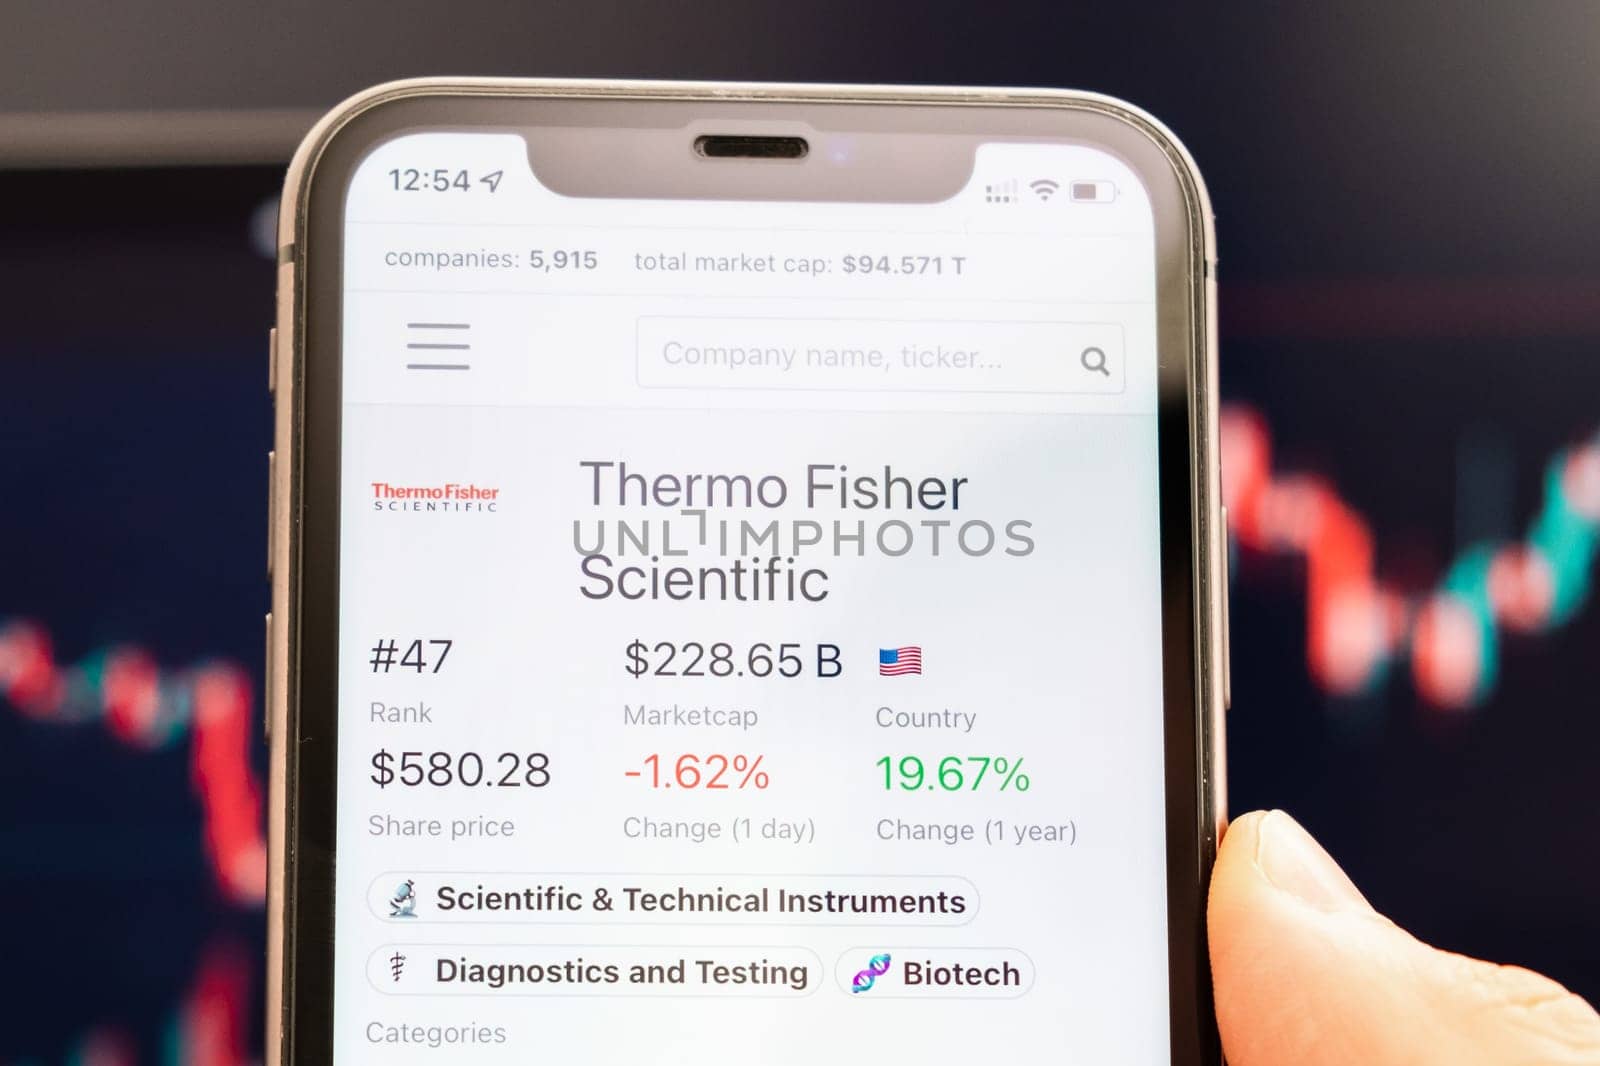 Thermo Fisher Scientific stock price on the screen of mobile phone in mans hand with changing stock market graphs on the background, February 2022, San Francisco, USA.